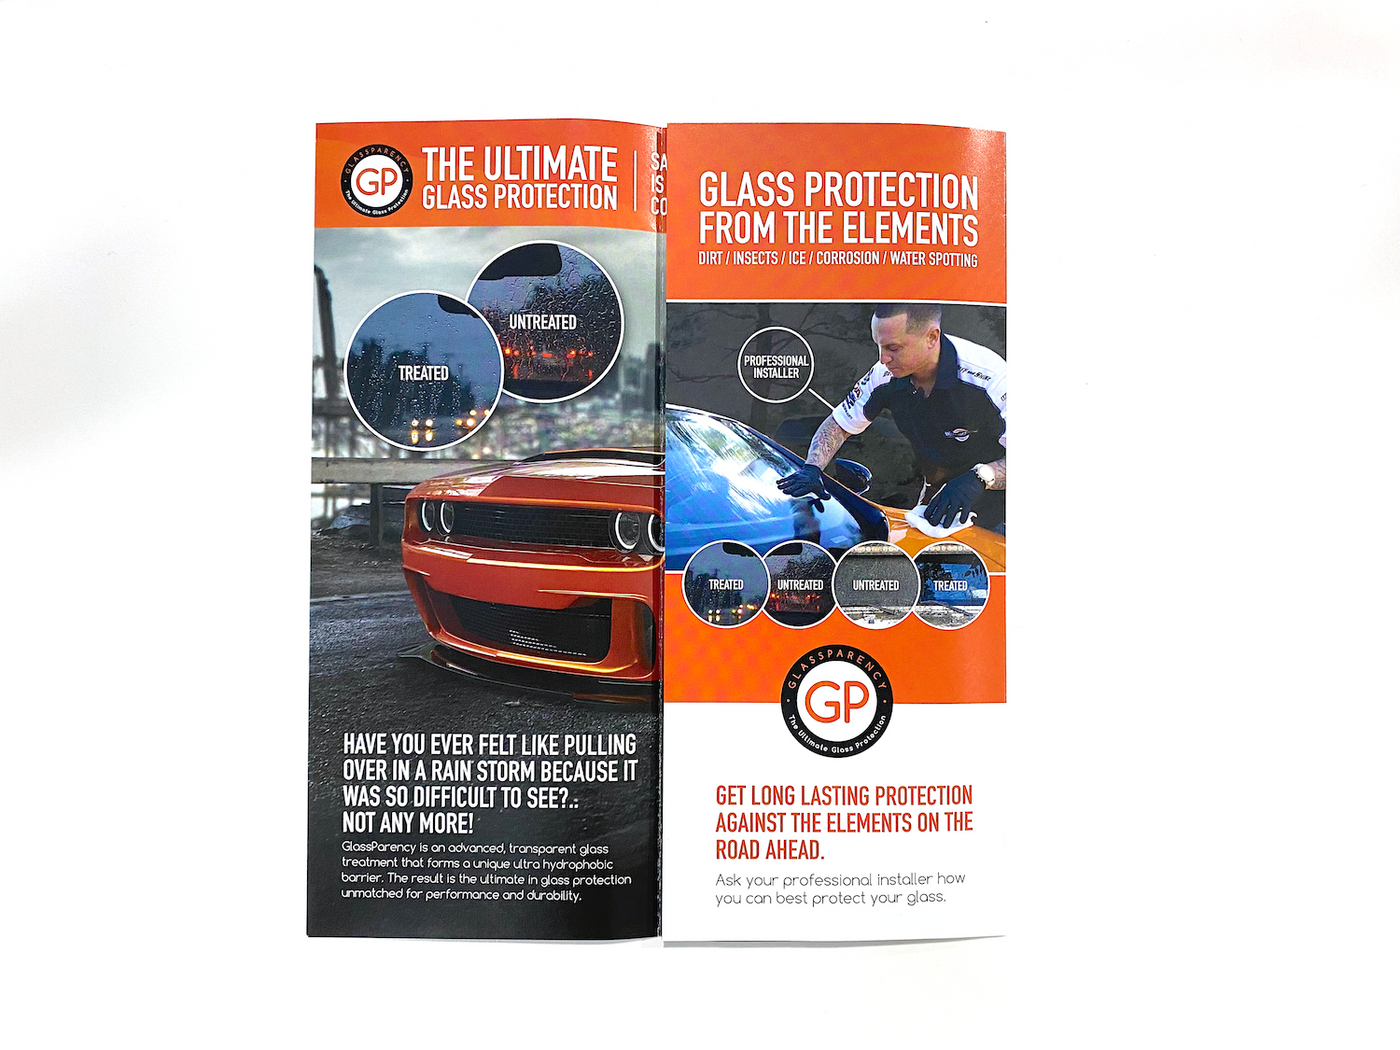 GlassParency Glass Protection Brochure (25 Pack)